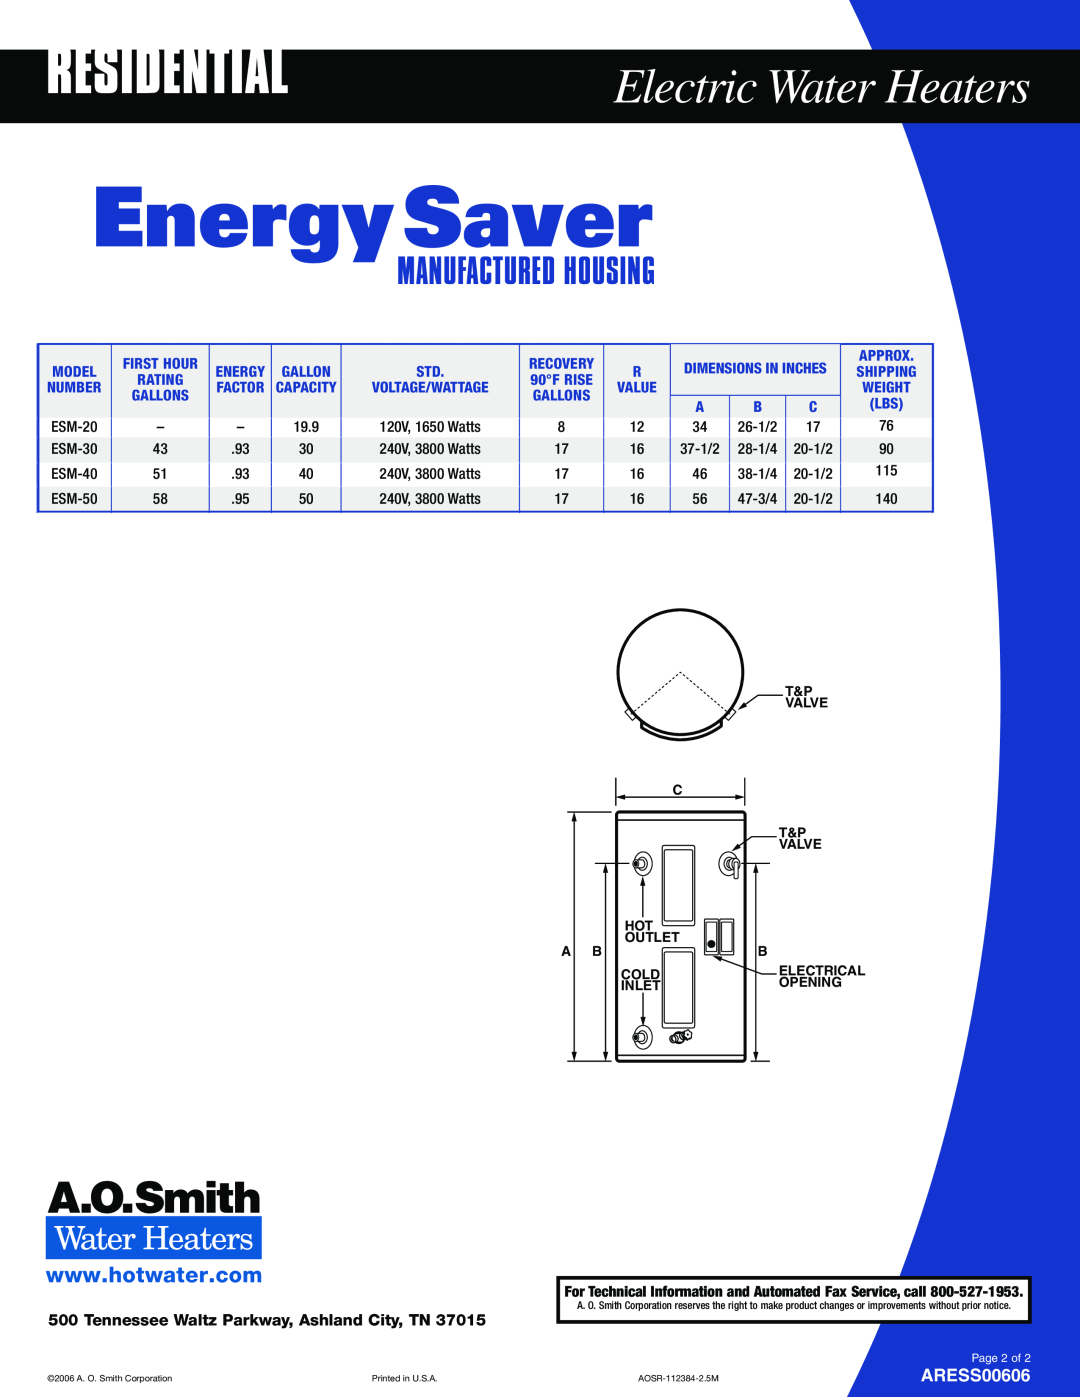 A.O. Smith ARESS00606 Electric Water Heaters, Energy Saver, Residential, Manufactured Housing, Shipping, 90F RISE, Factor 